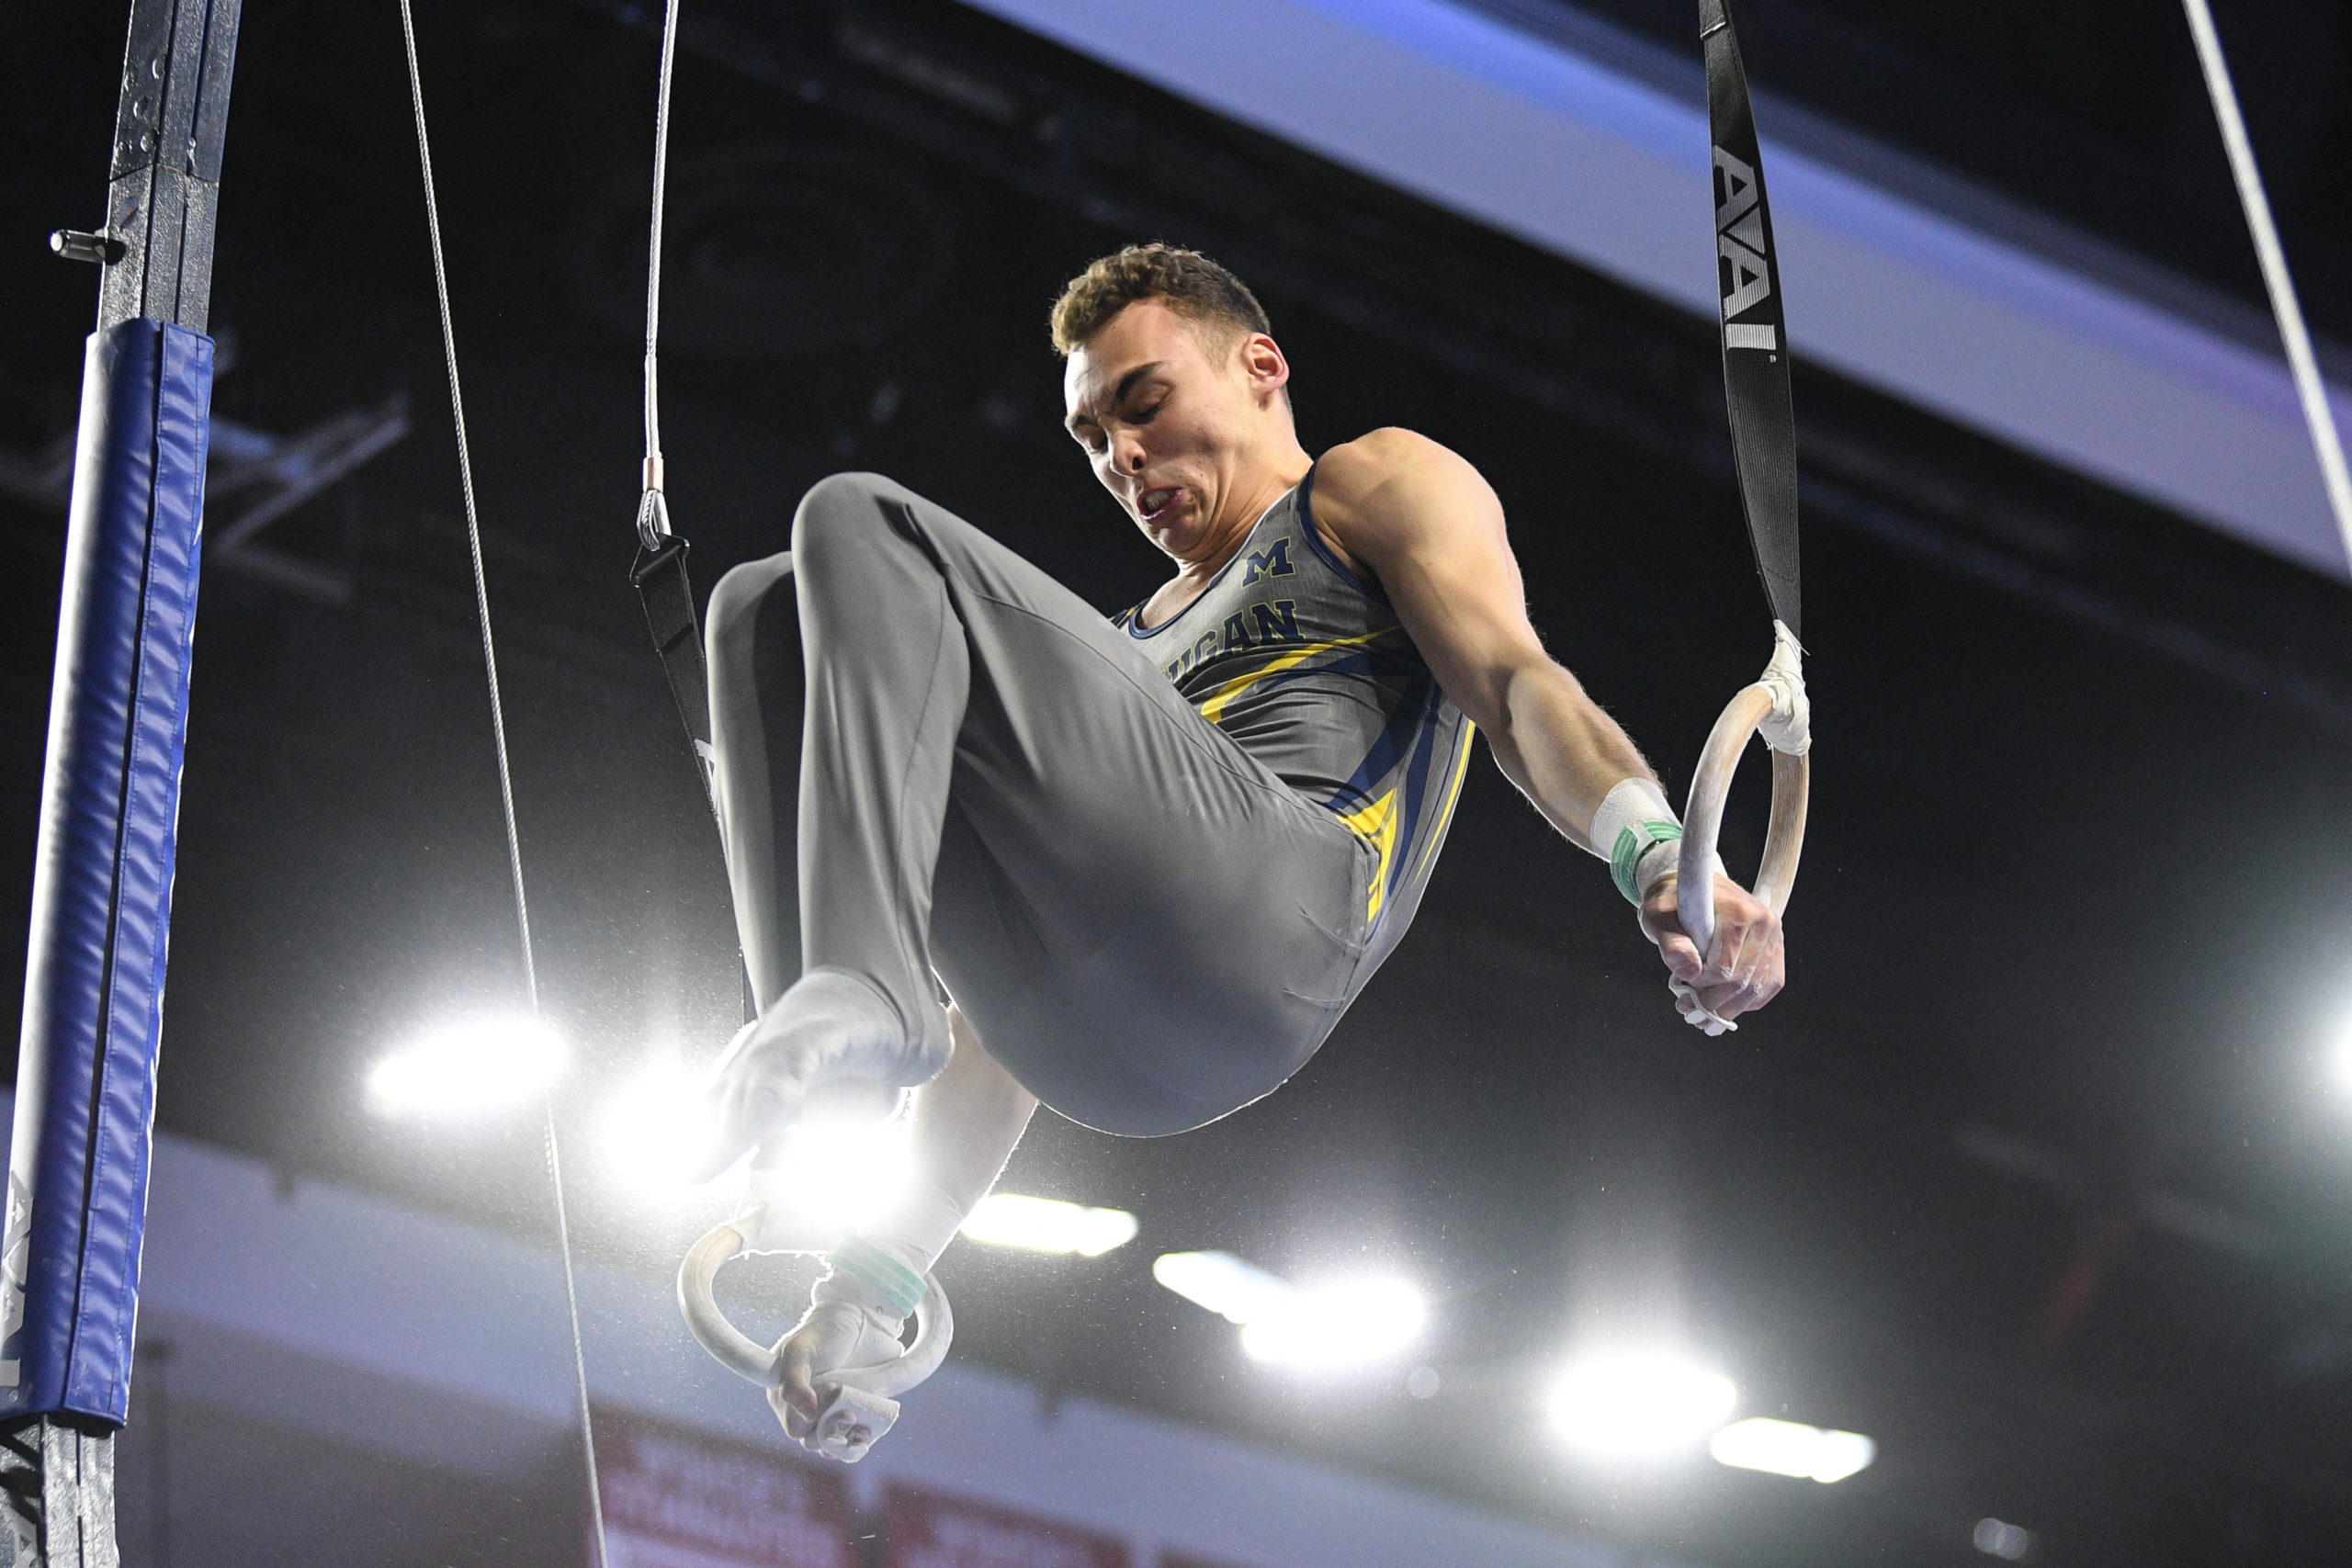 Michigan's Crew Bold competes on still rings during the 2022 NCAA Men's Gymnastics Championships.